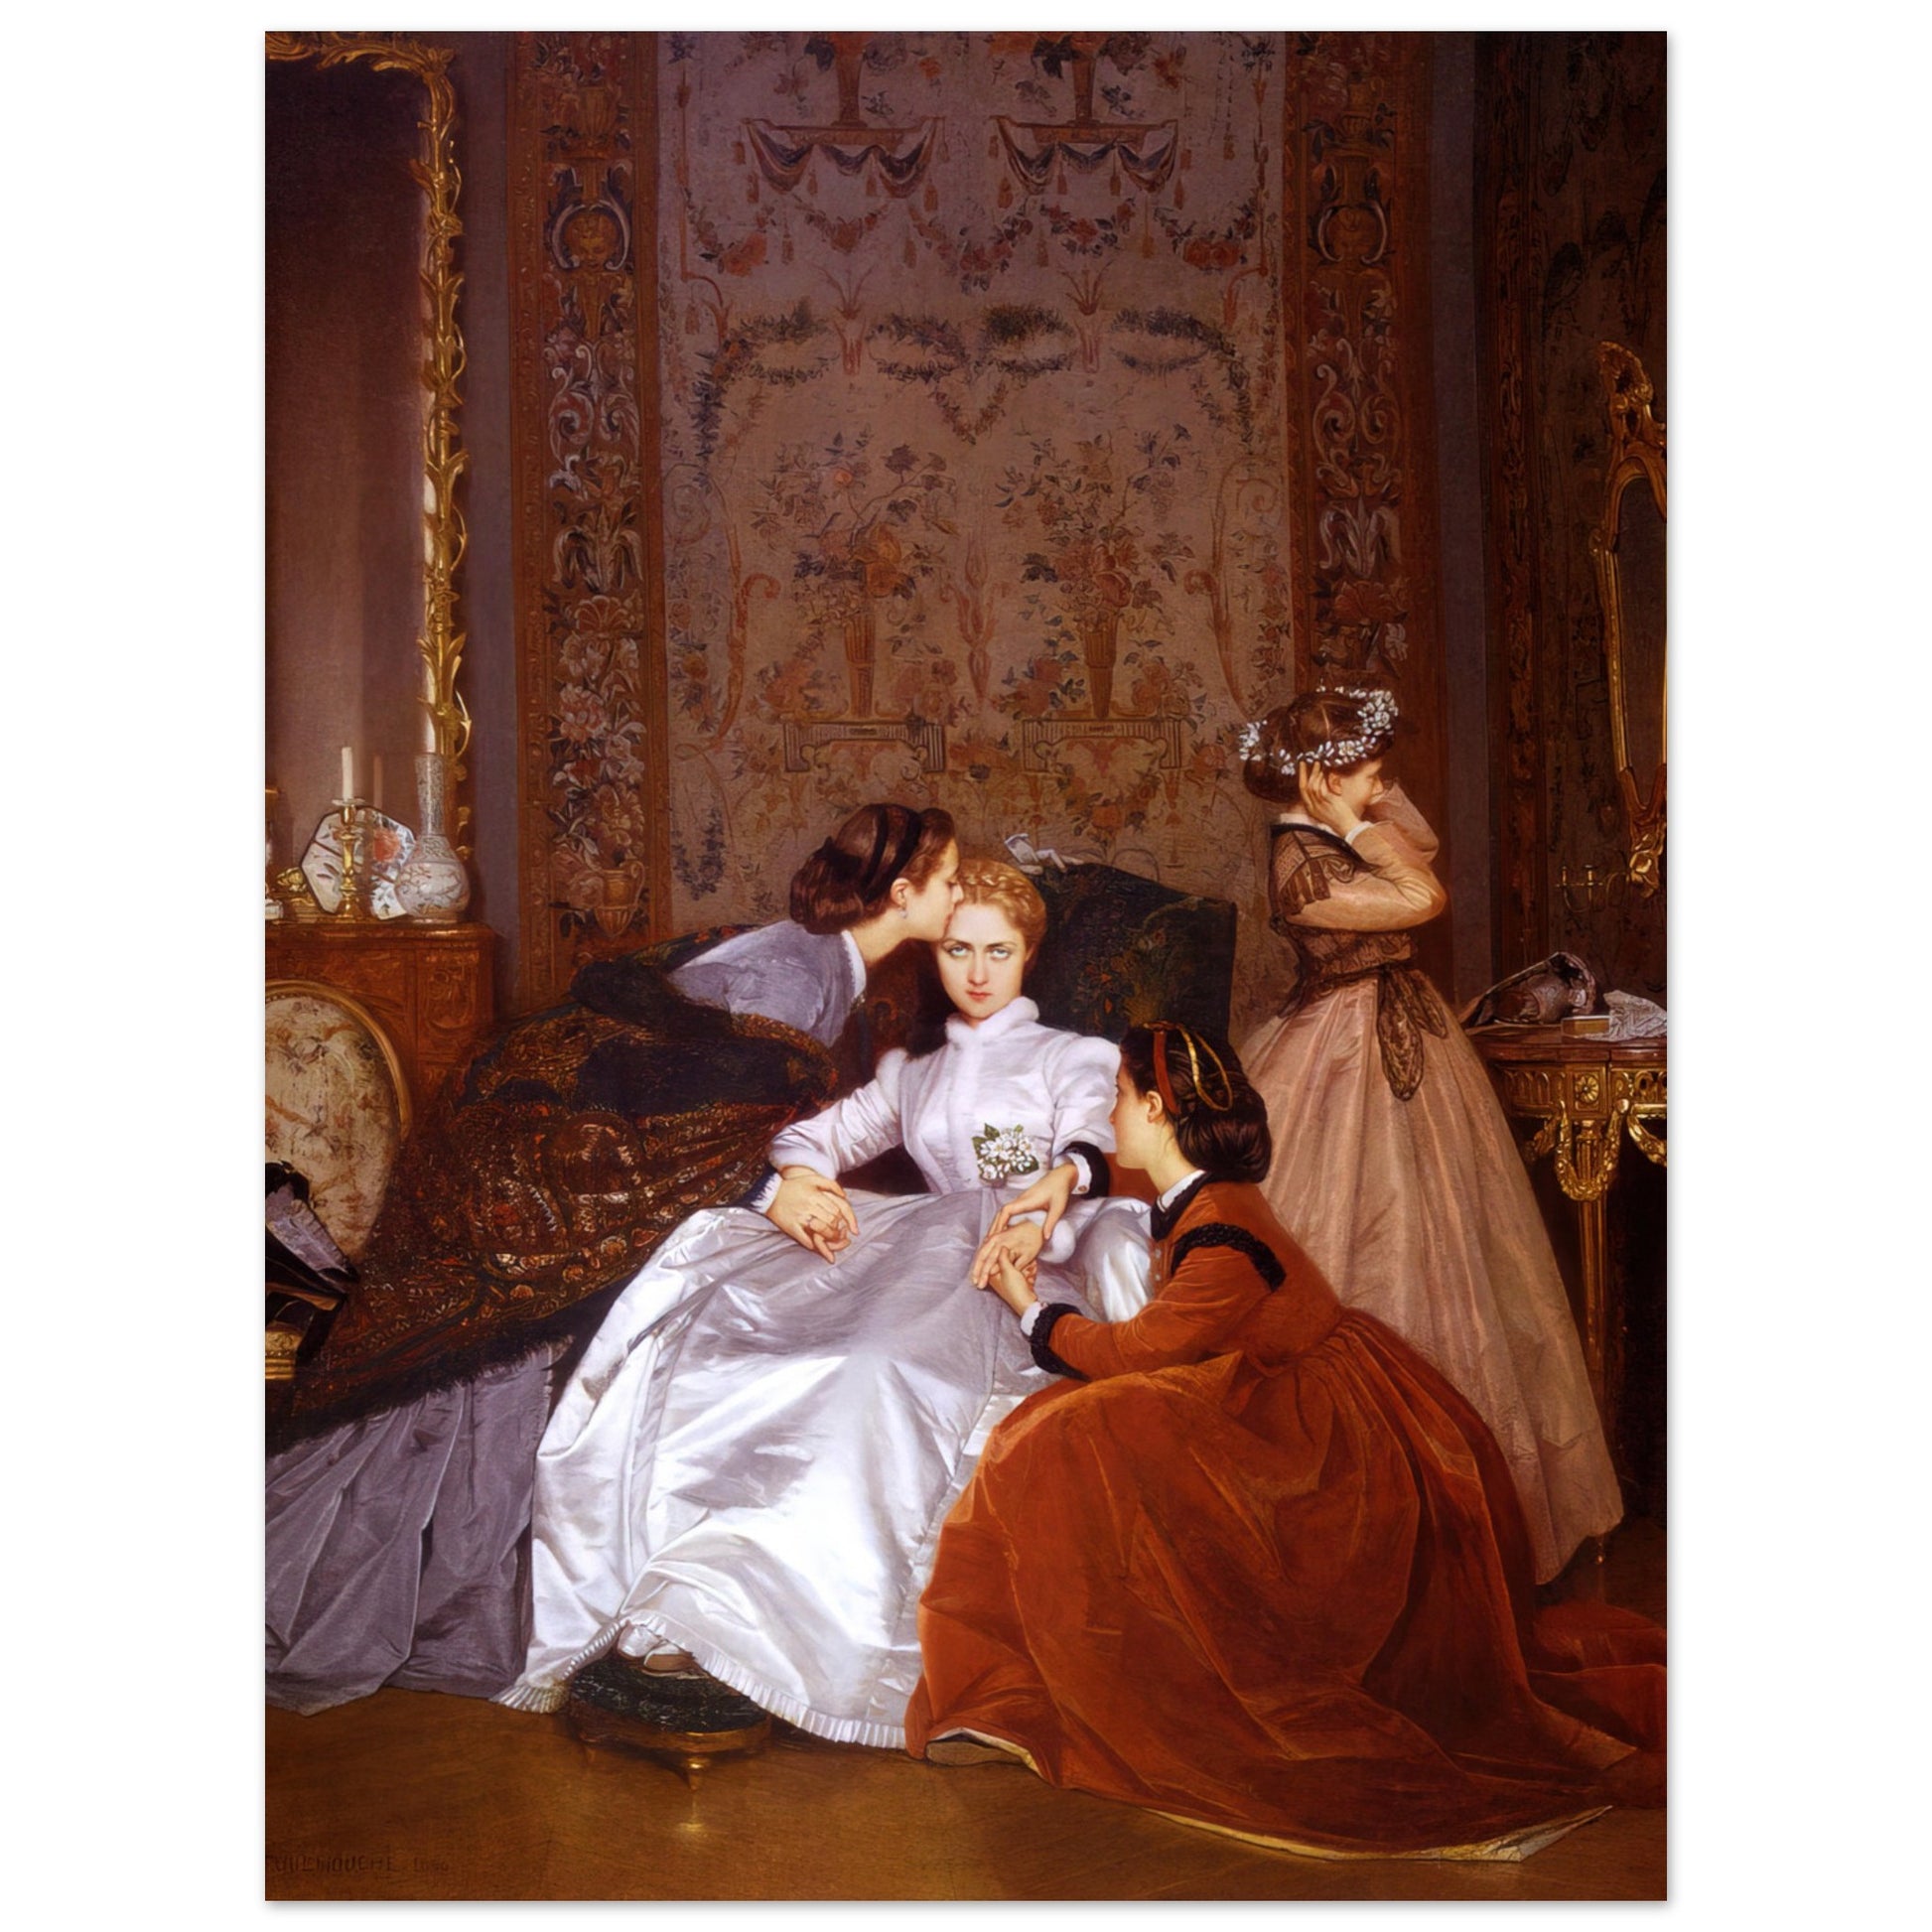 The Reluctant Bride (1866) by Auguste Toulmouche